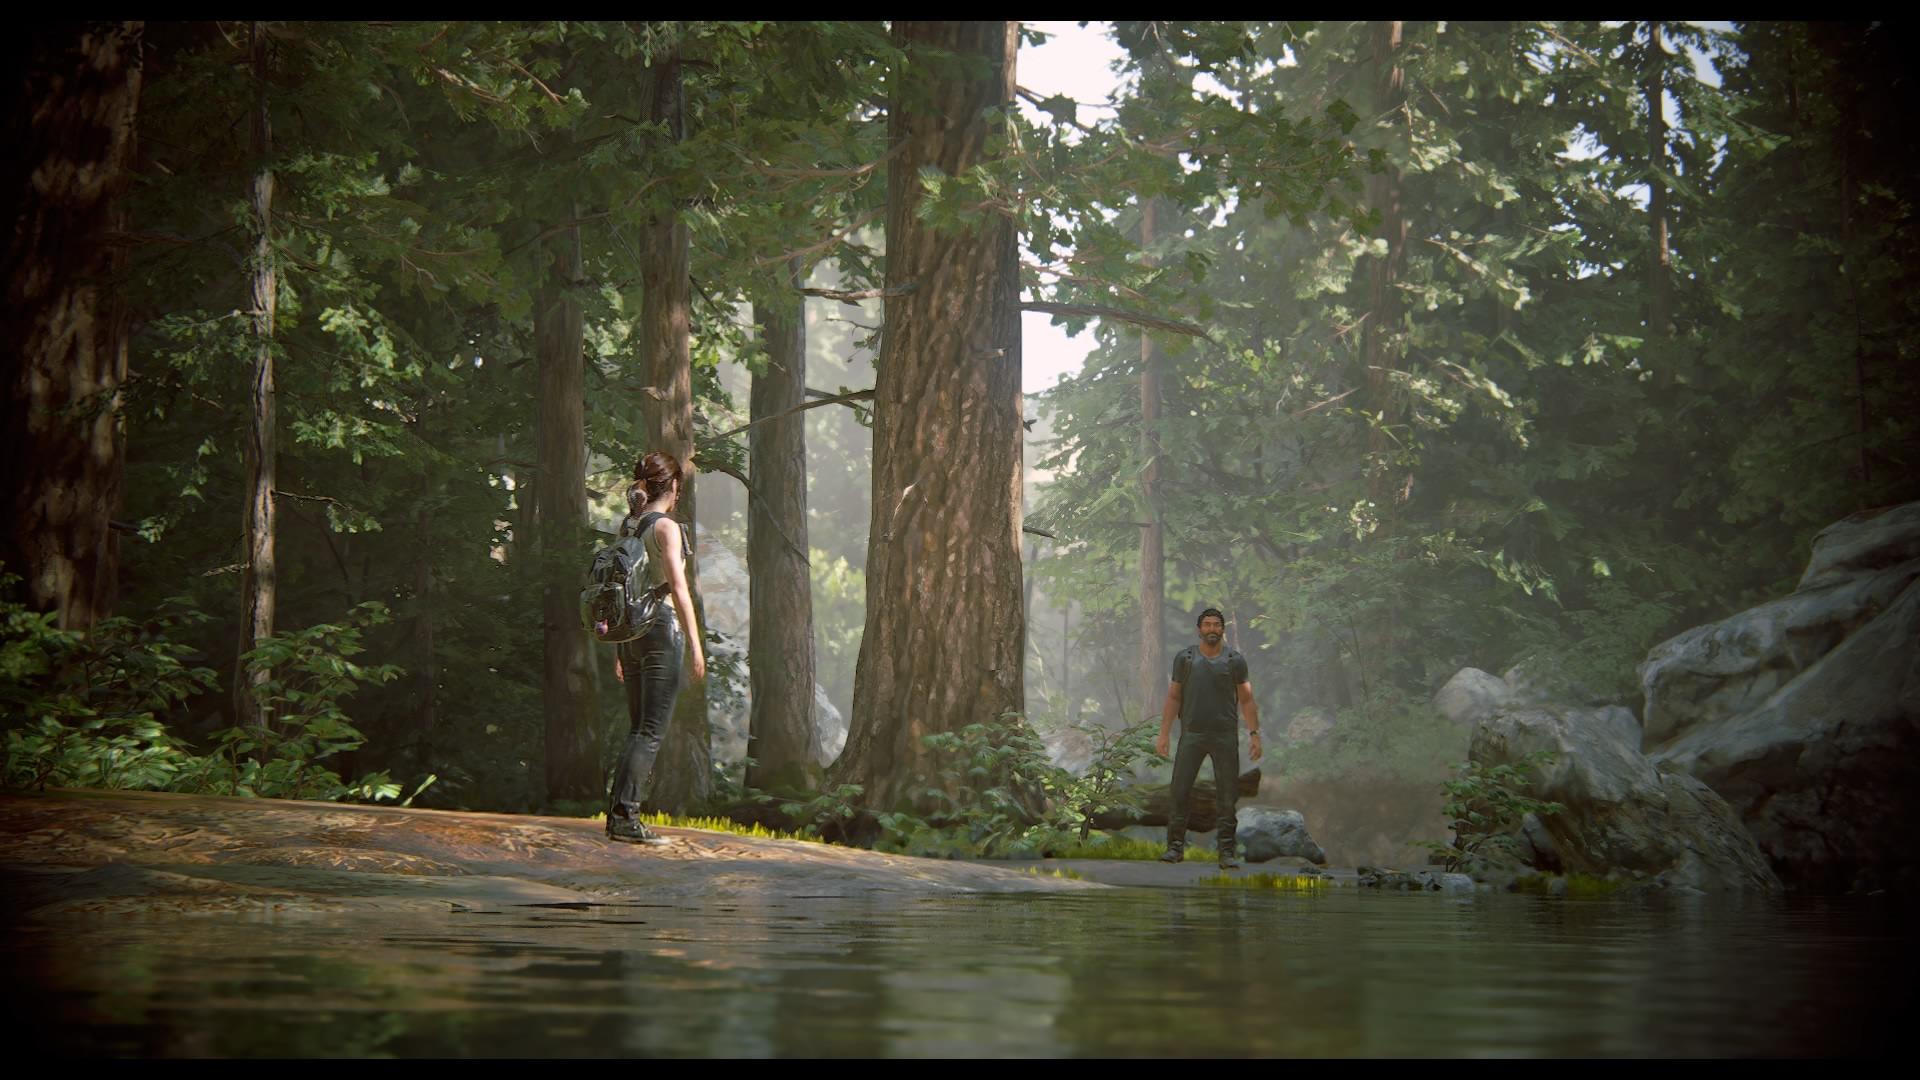 Jungle Image from The Last of Us 2